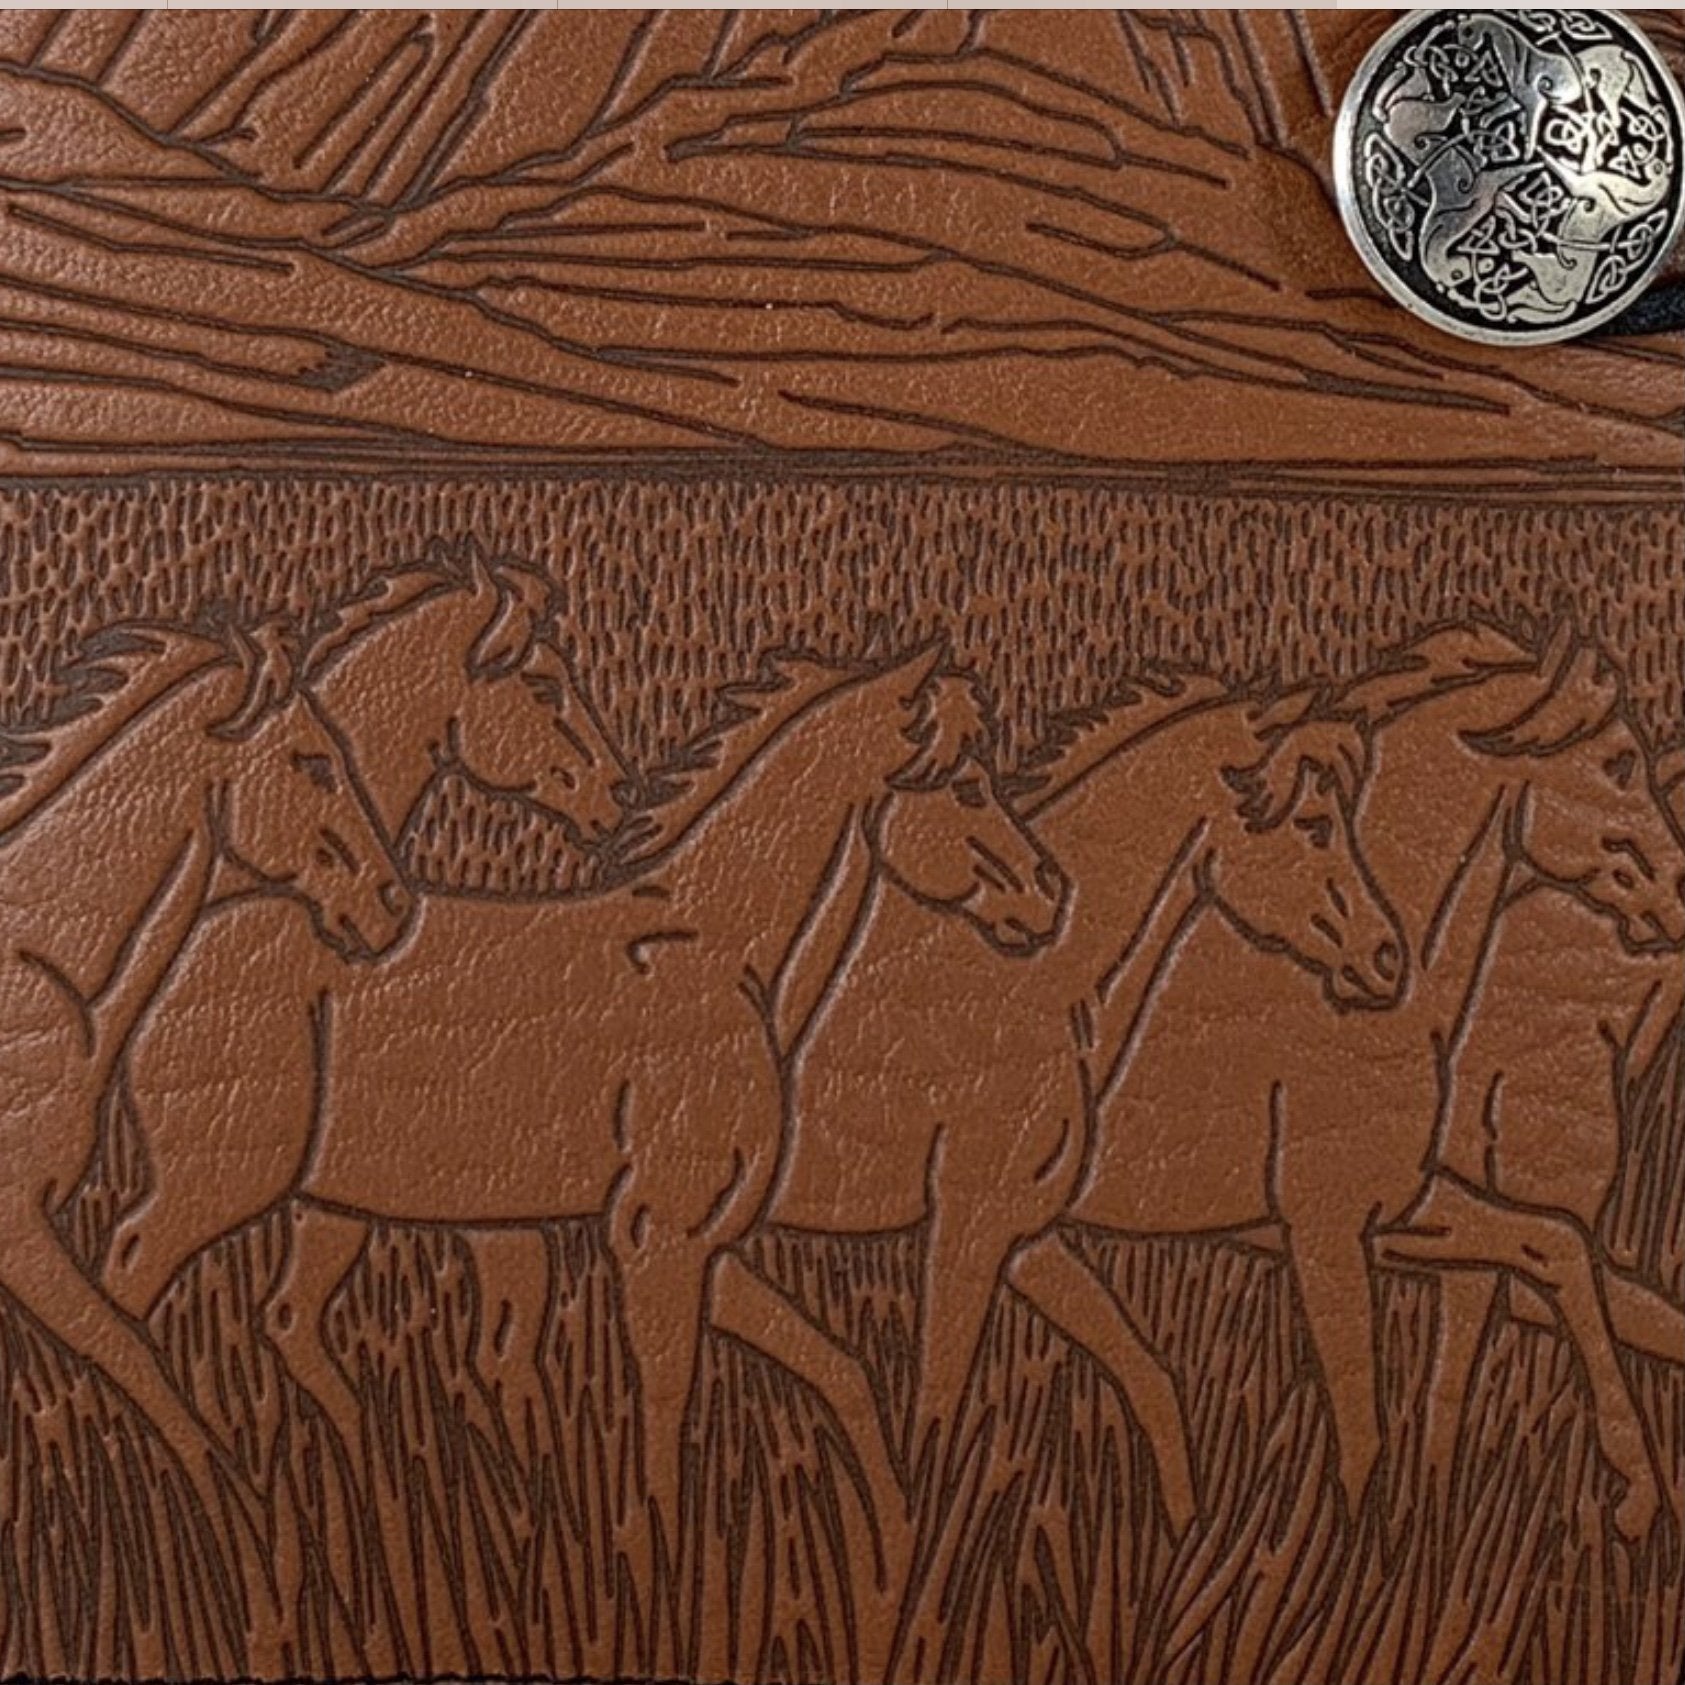 Oberon Design Hand-Crafted Products with Horse Images.